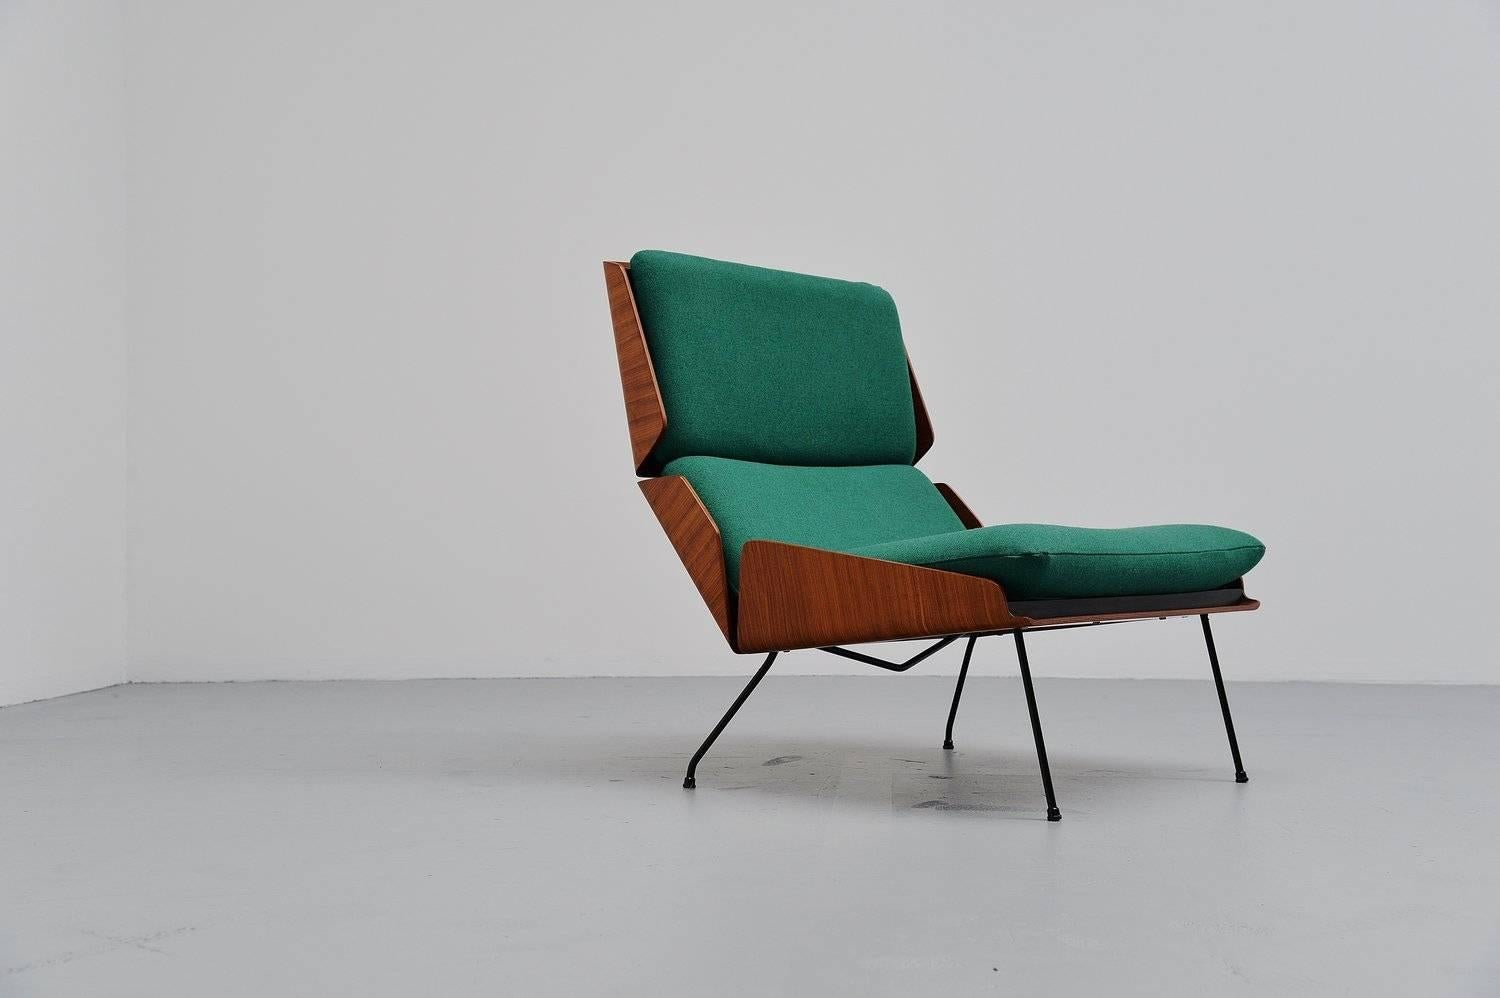 Amazing shaped lounge chair designed by Georges van Rijck for Beaufort, Belgium, 1959. This chair has a teak plywood frame existing in three parts. Attached to a solid black lacquered metal frame and it has new high quality upholstery (Tonica by